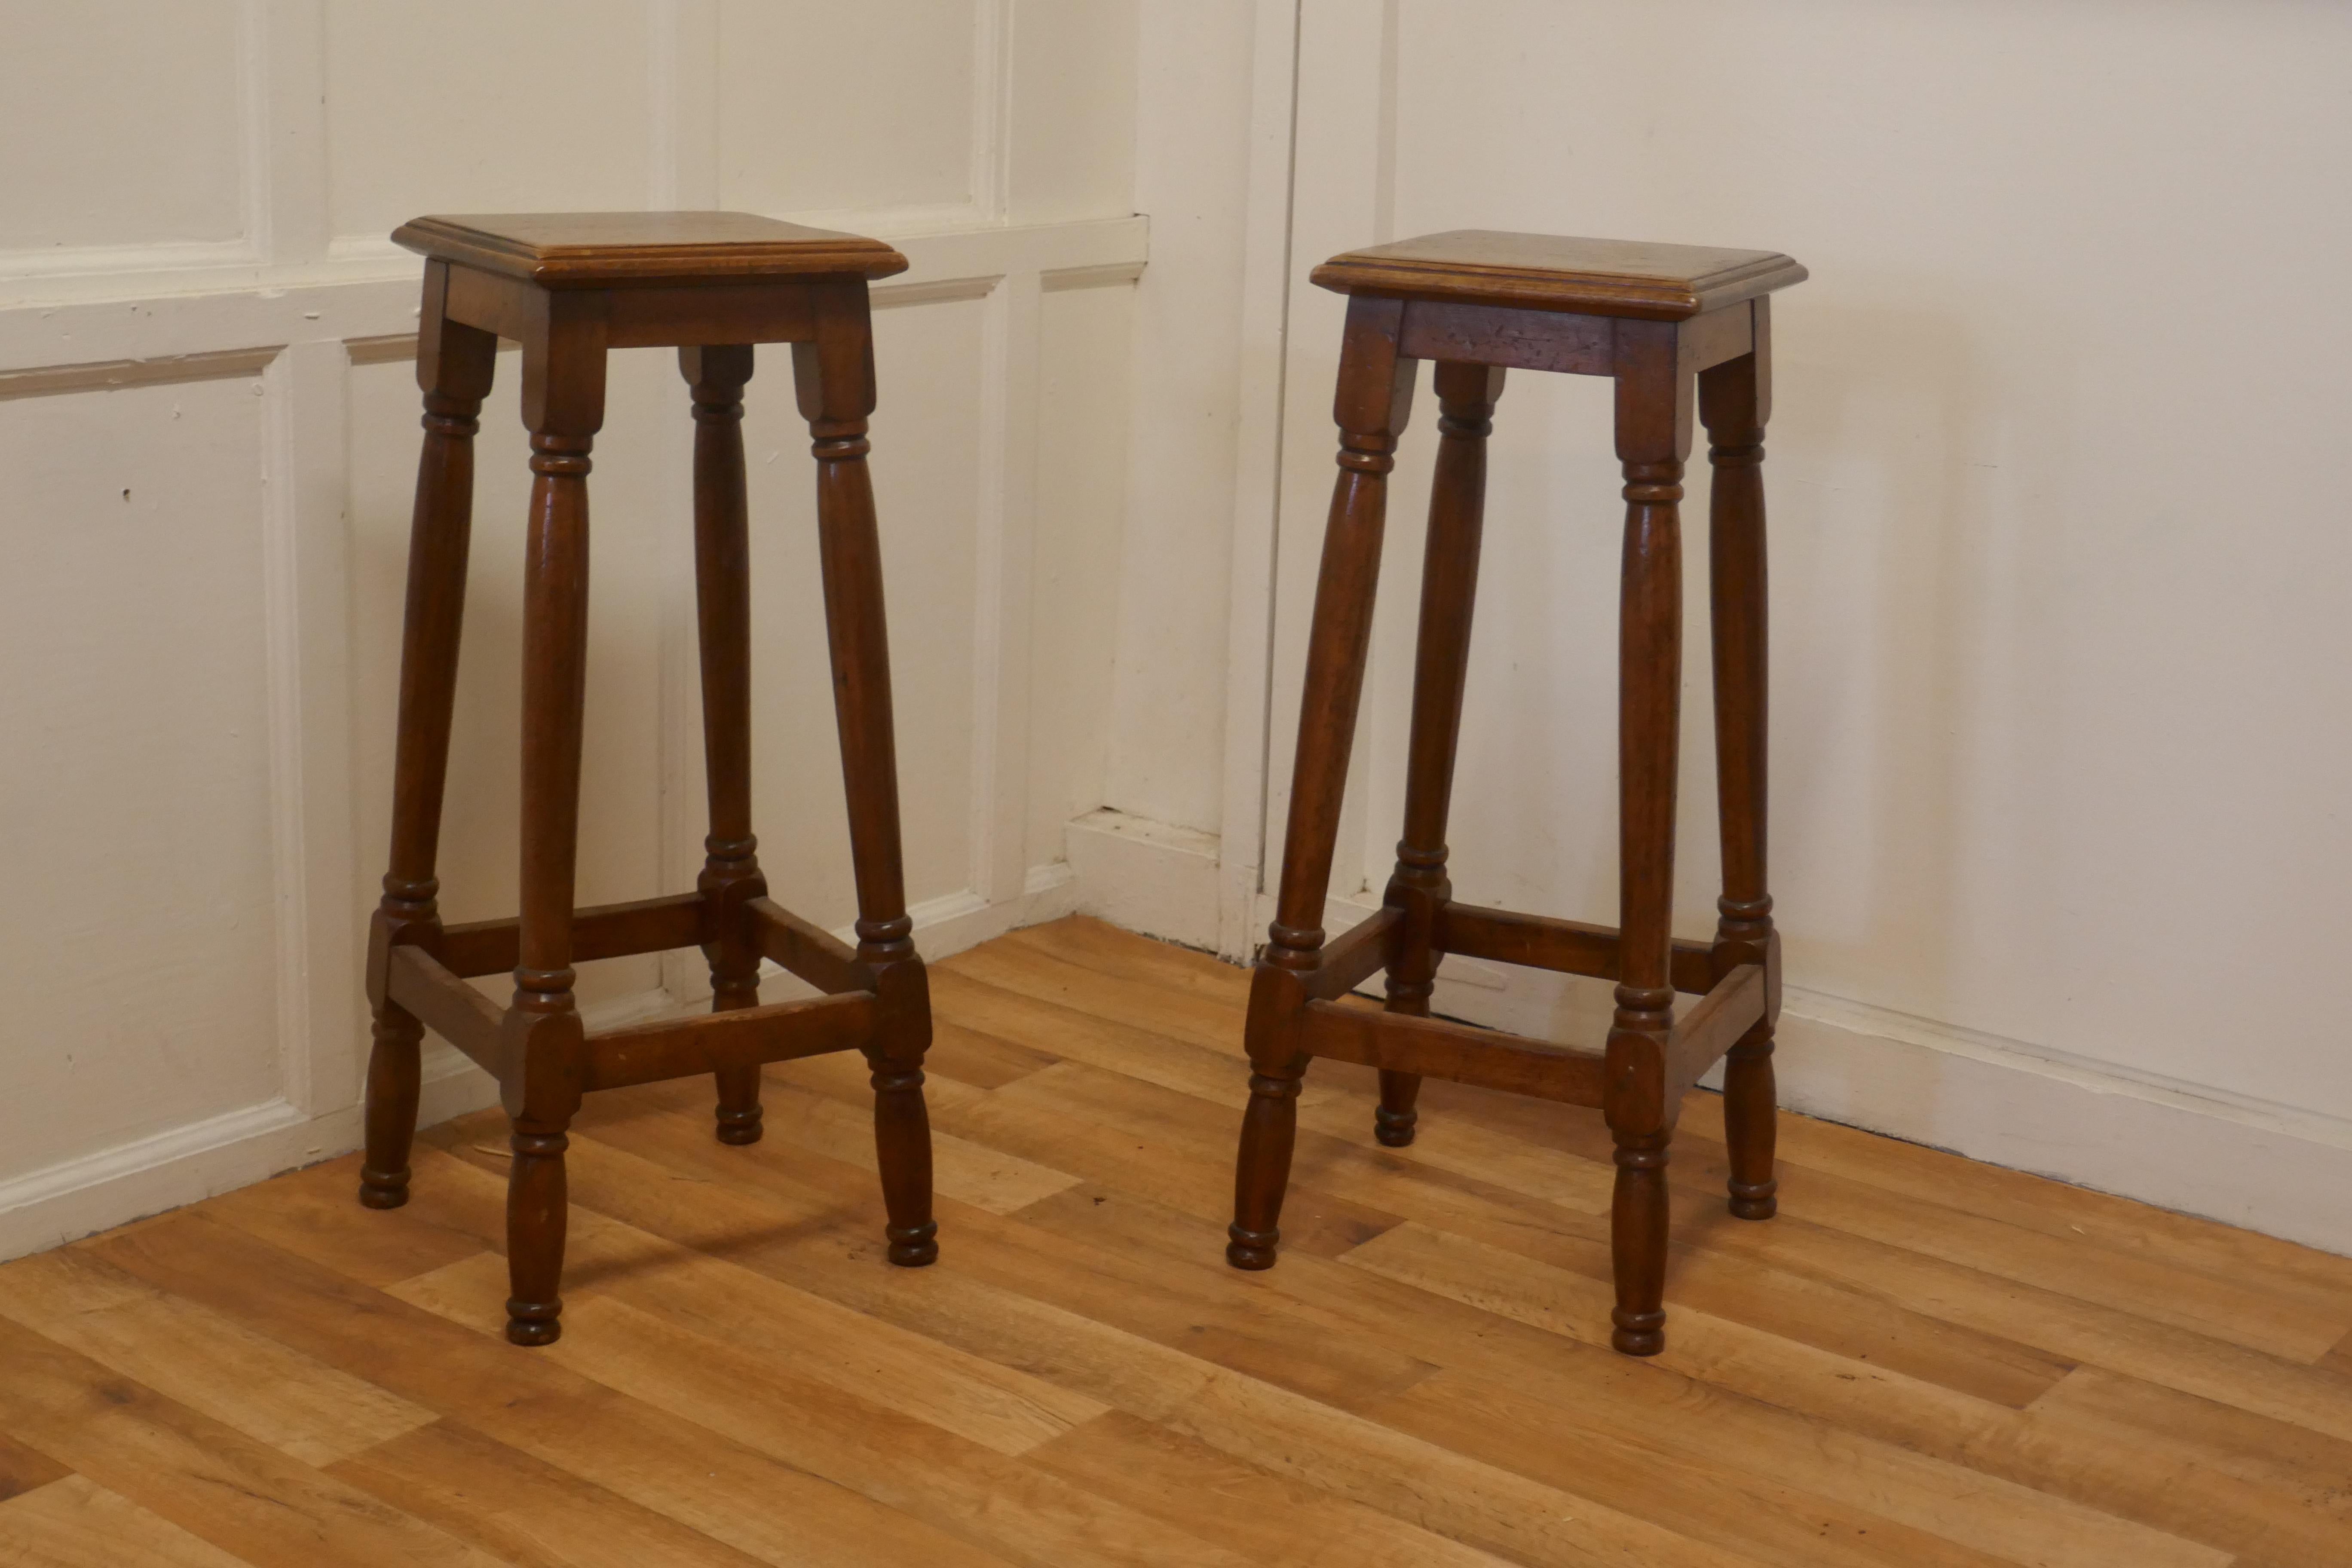 A Pair of French walnut farmhouse high kitchen stools

These are an elegant pair they have a square seat and are set on tall turned stretchered legs 
The stools are in good sound condition, and have an aged patina
 The stools are 32” high, the